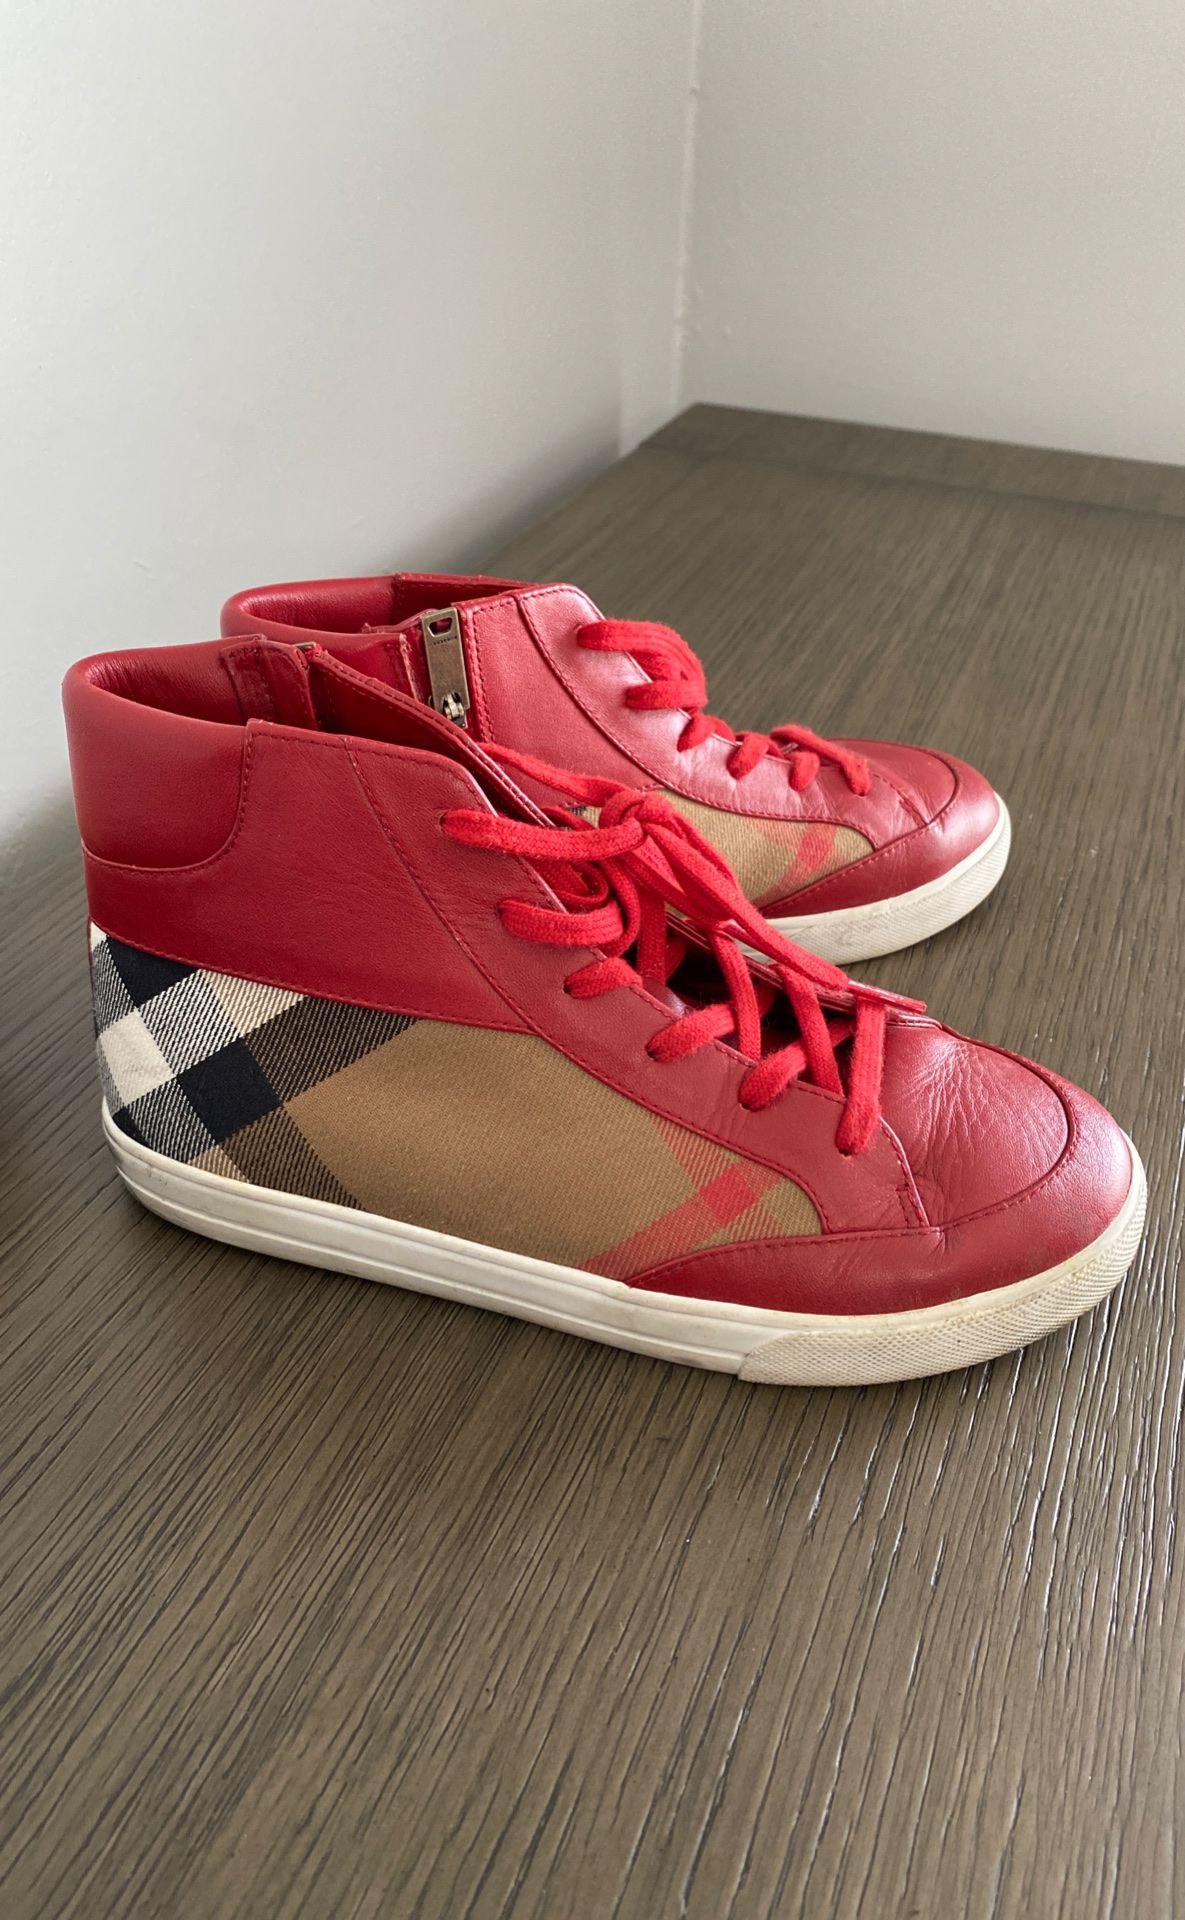 Authentic Burberry leather red high tops size 34